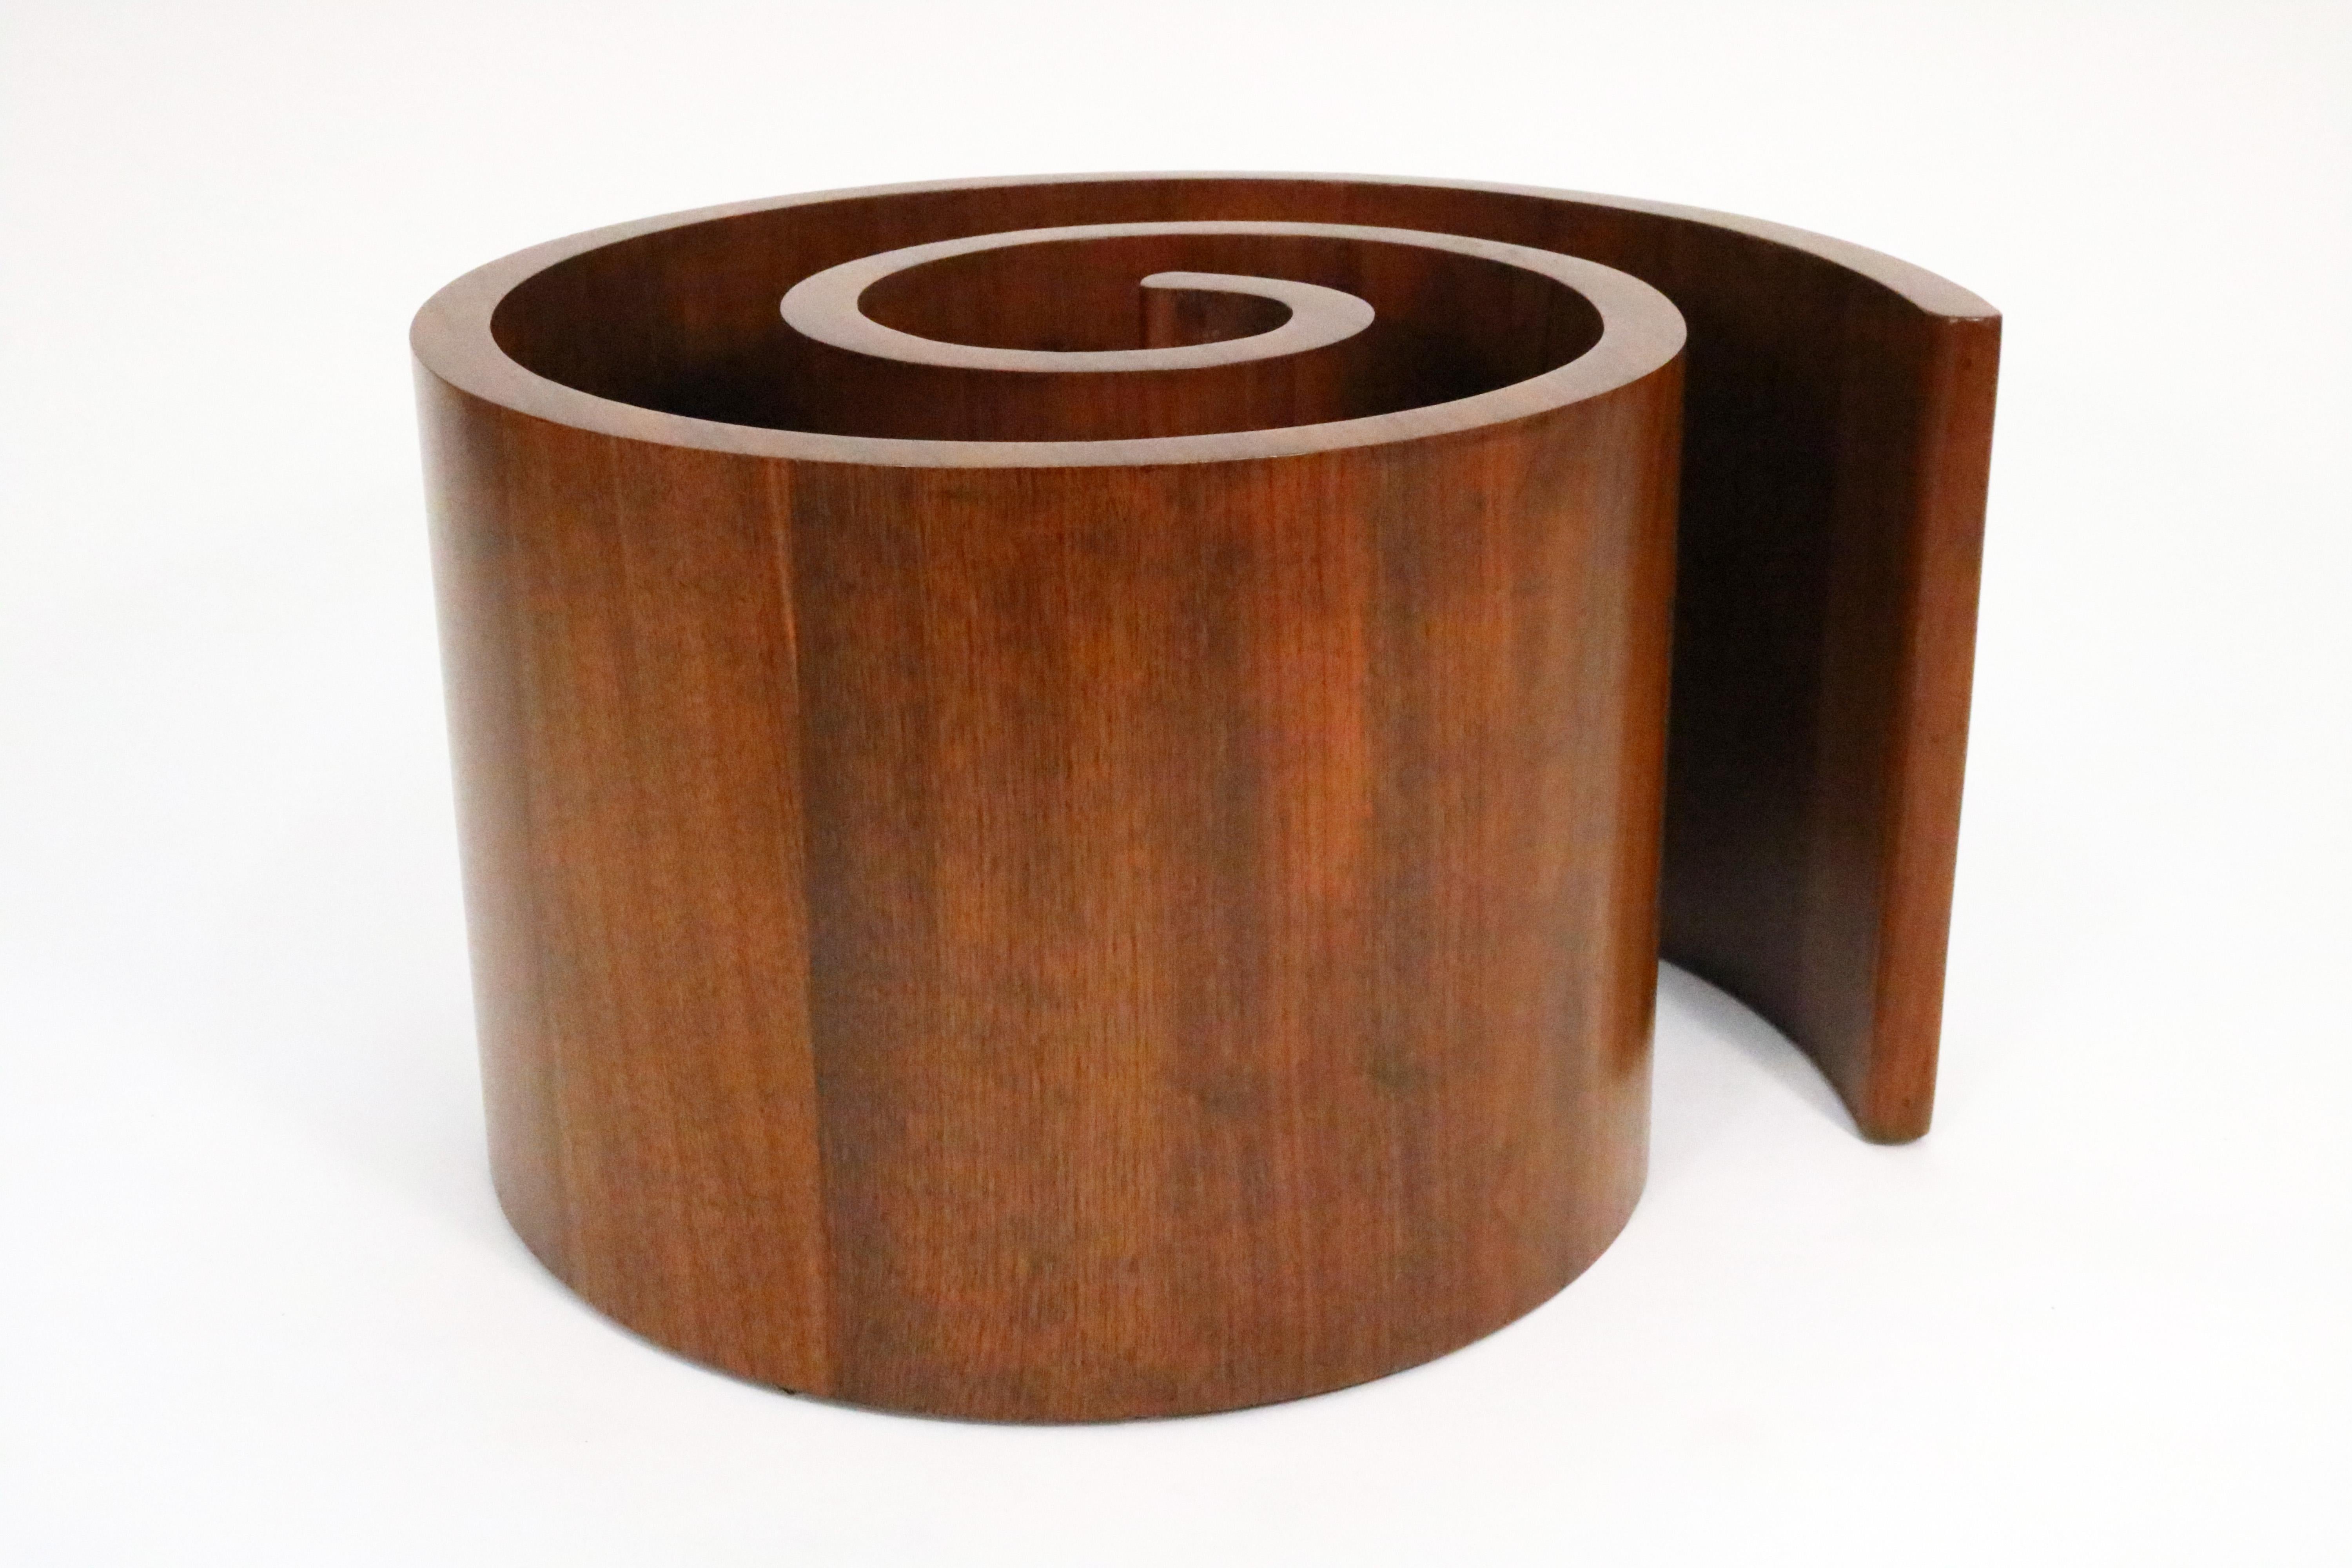 Tempered Vladimir Kagan Snail Coffee Table in Walnut with Round Glass Top